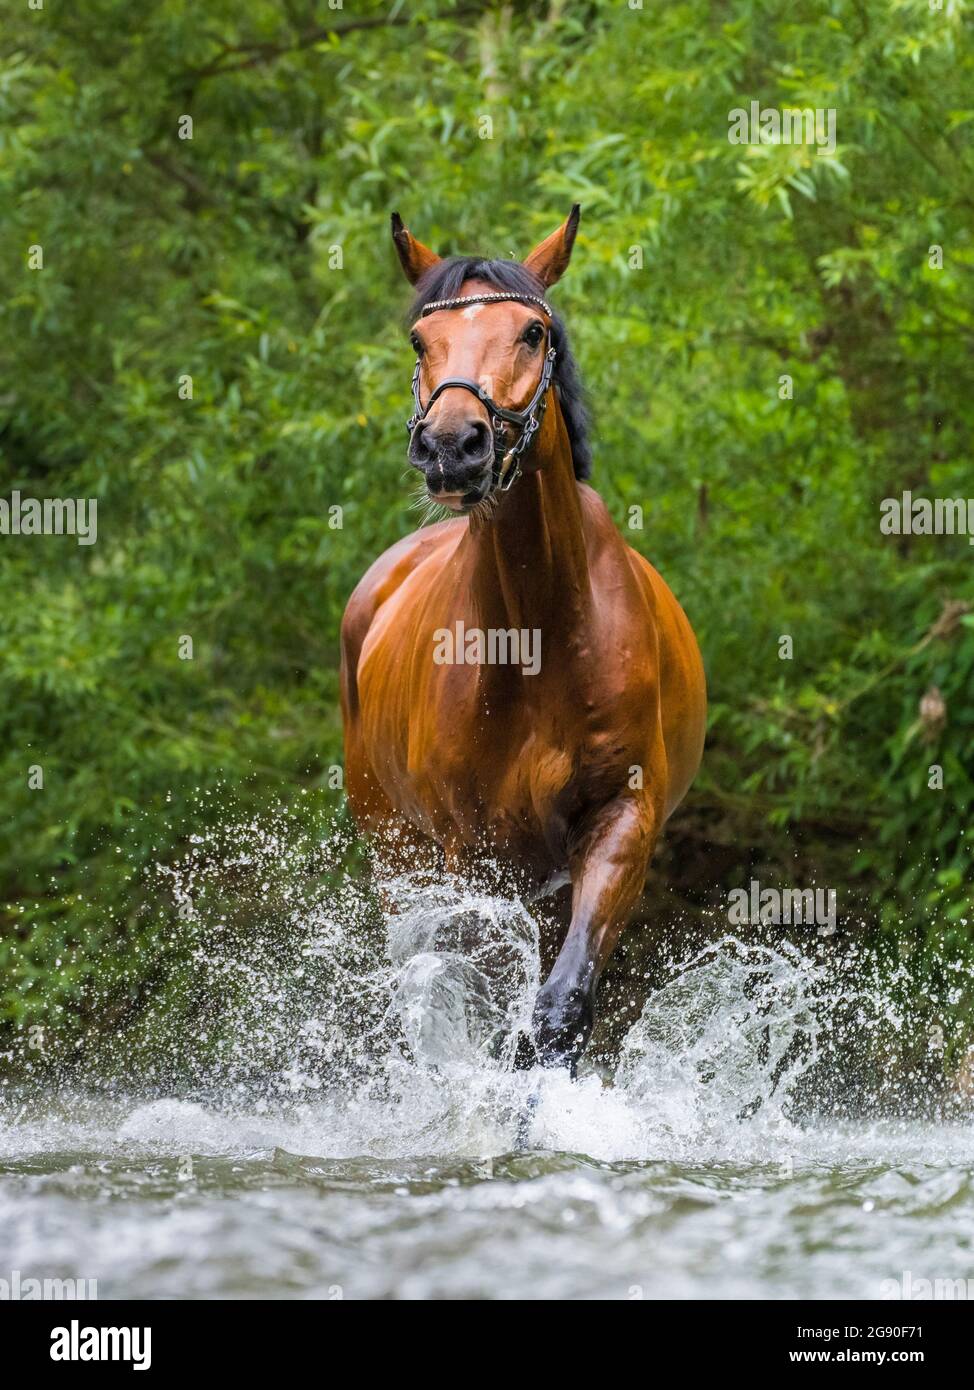 Warmblood horse running while splashing water in river at forest Stock Photo